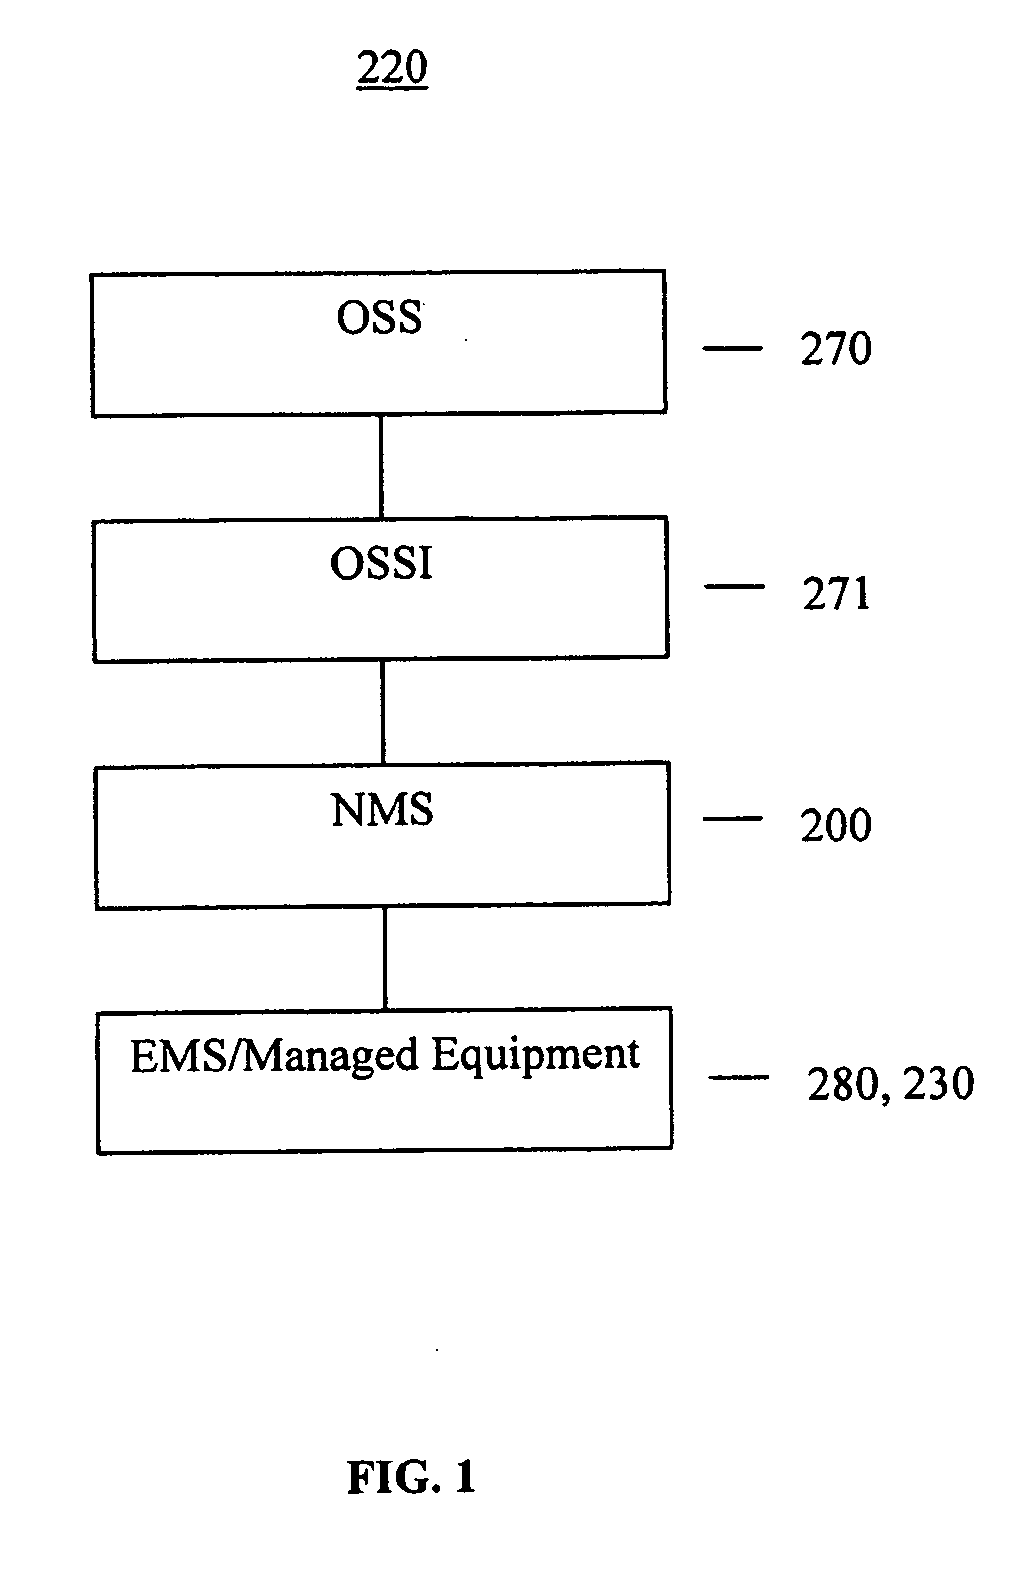 Method and system for configuring network devices through an operations support system interface